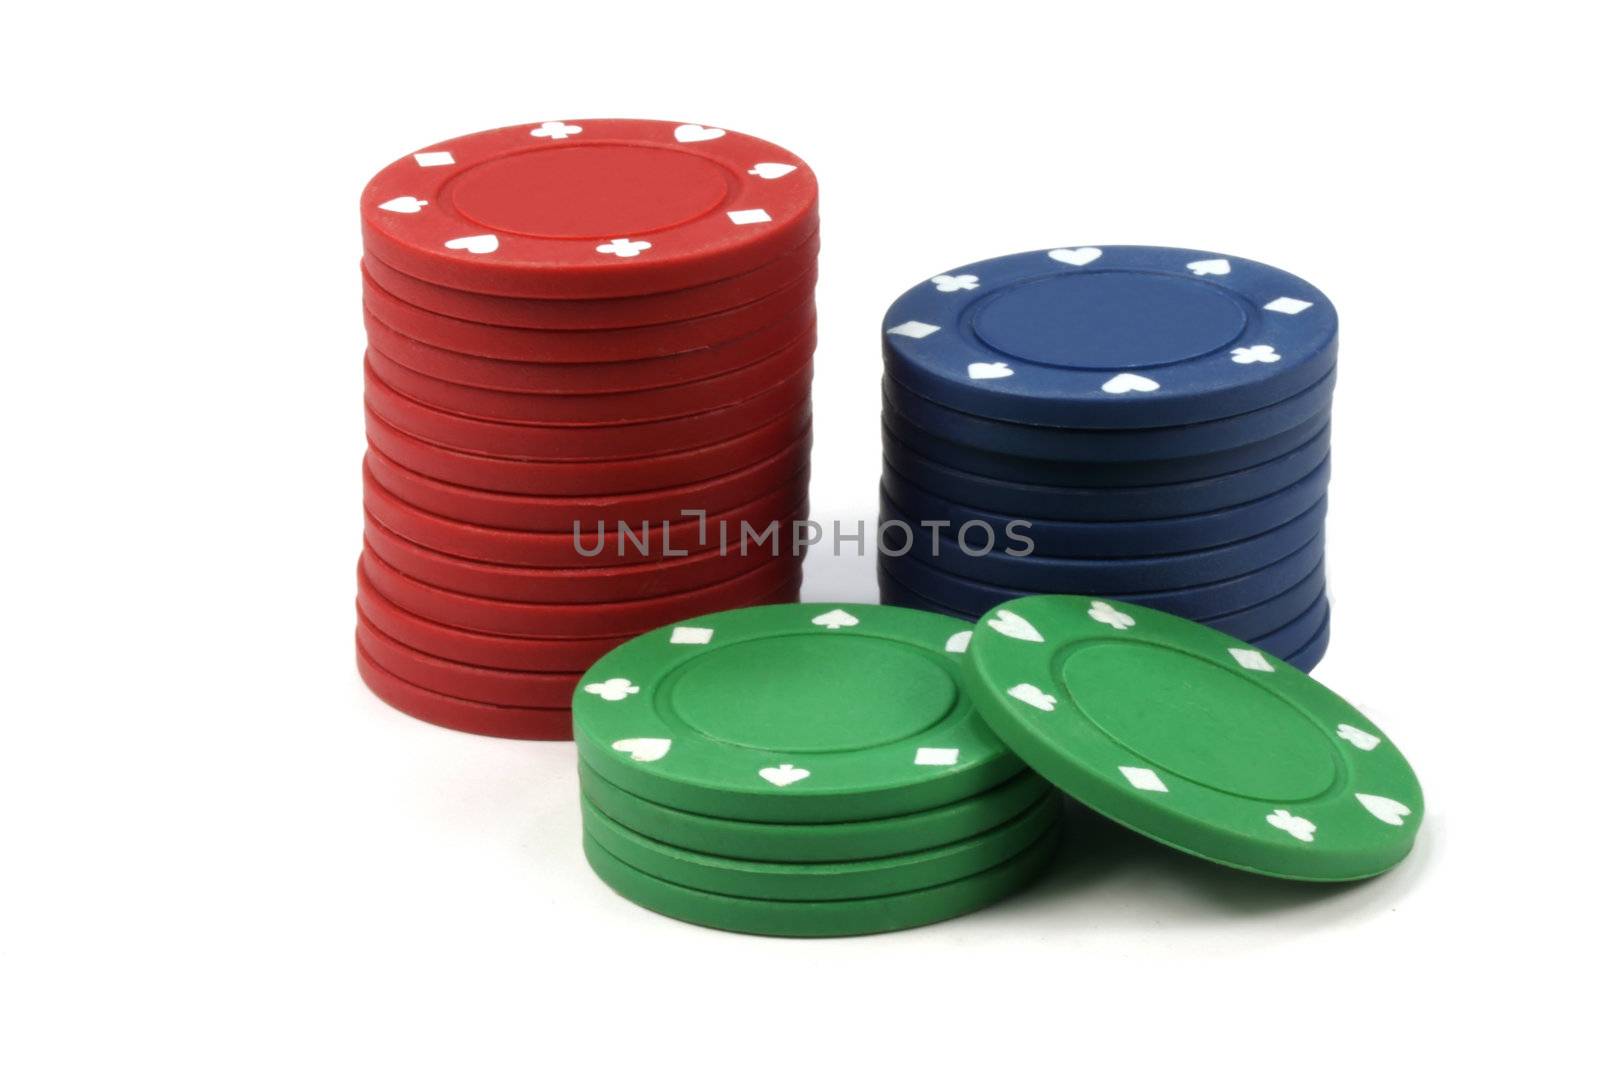 Stacked poker casino chips by TVR